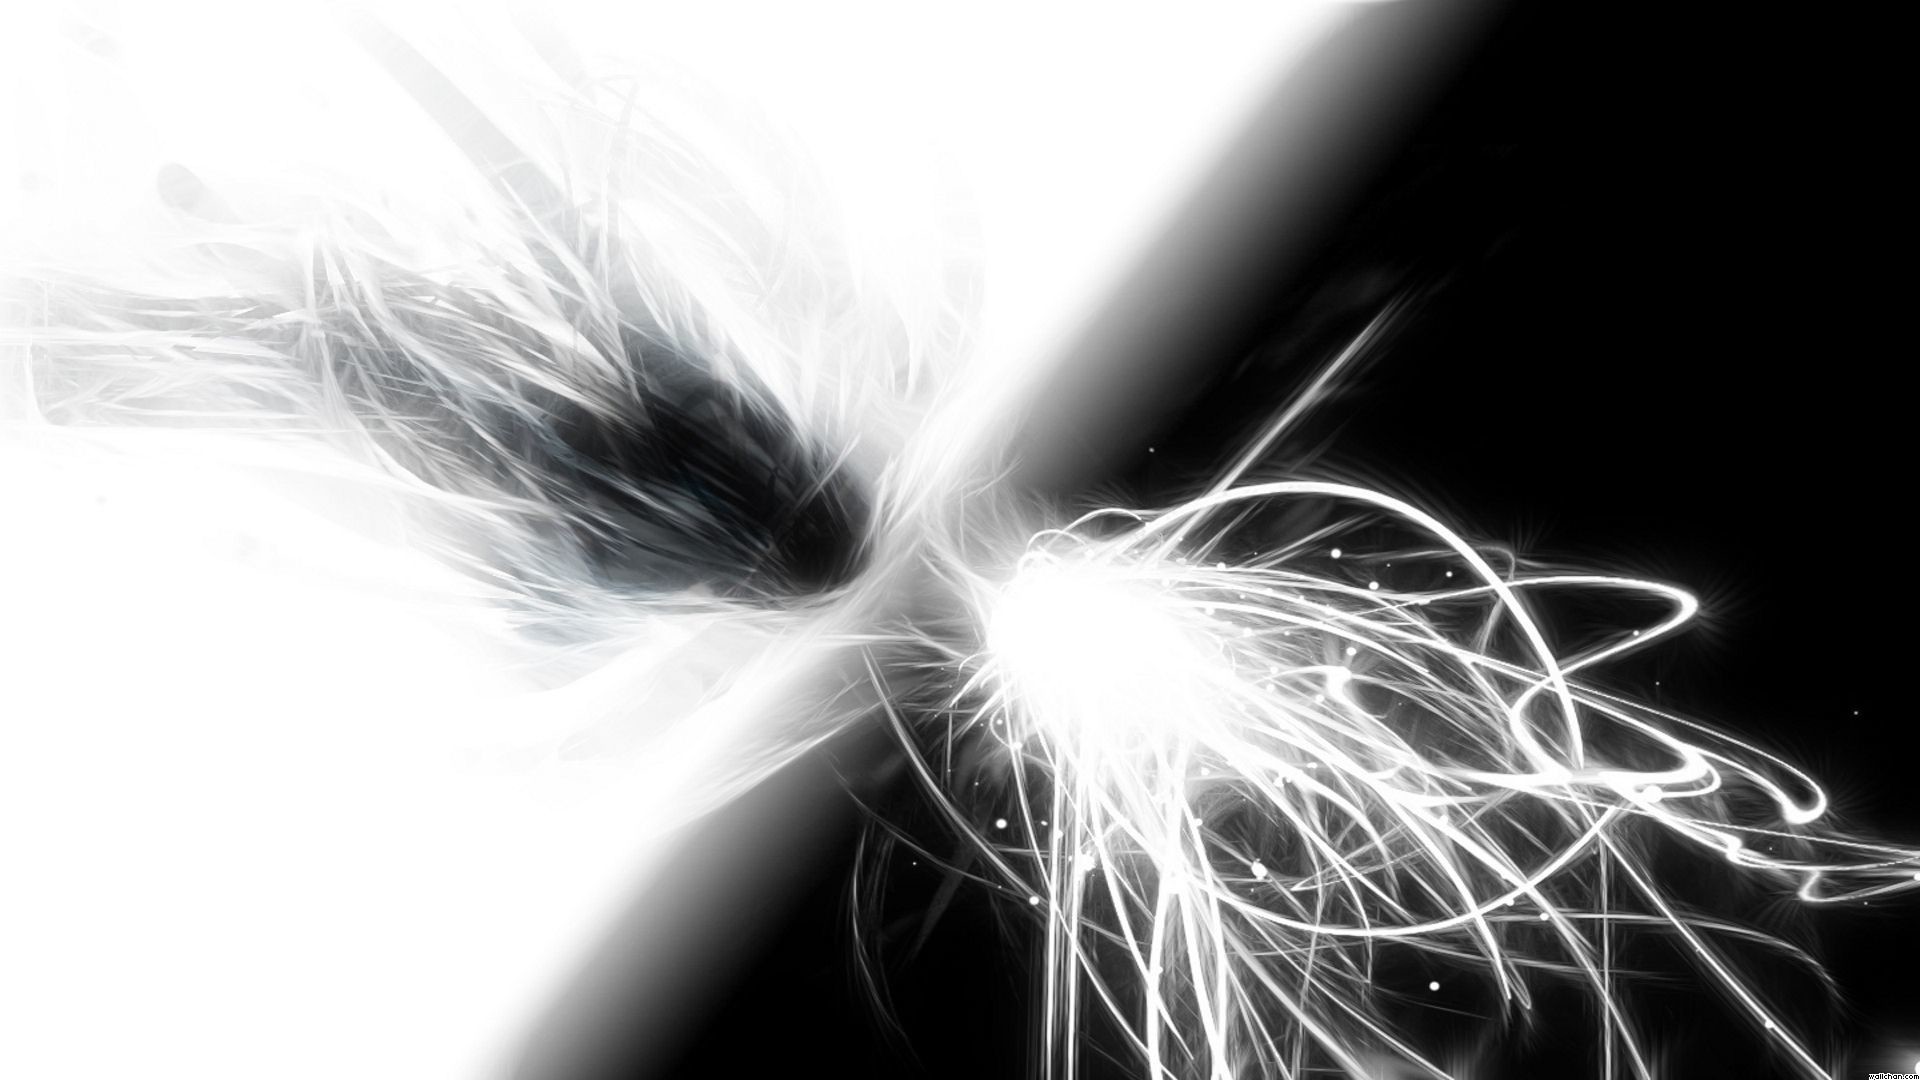 1920x1080 Black and White Abstract Art | Abstract Black White Digital Art x